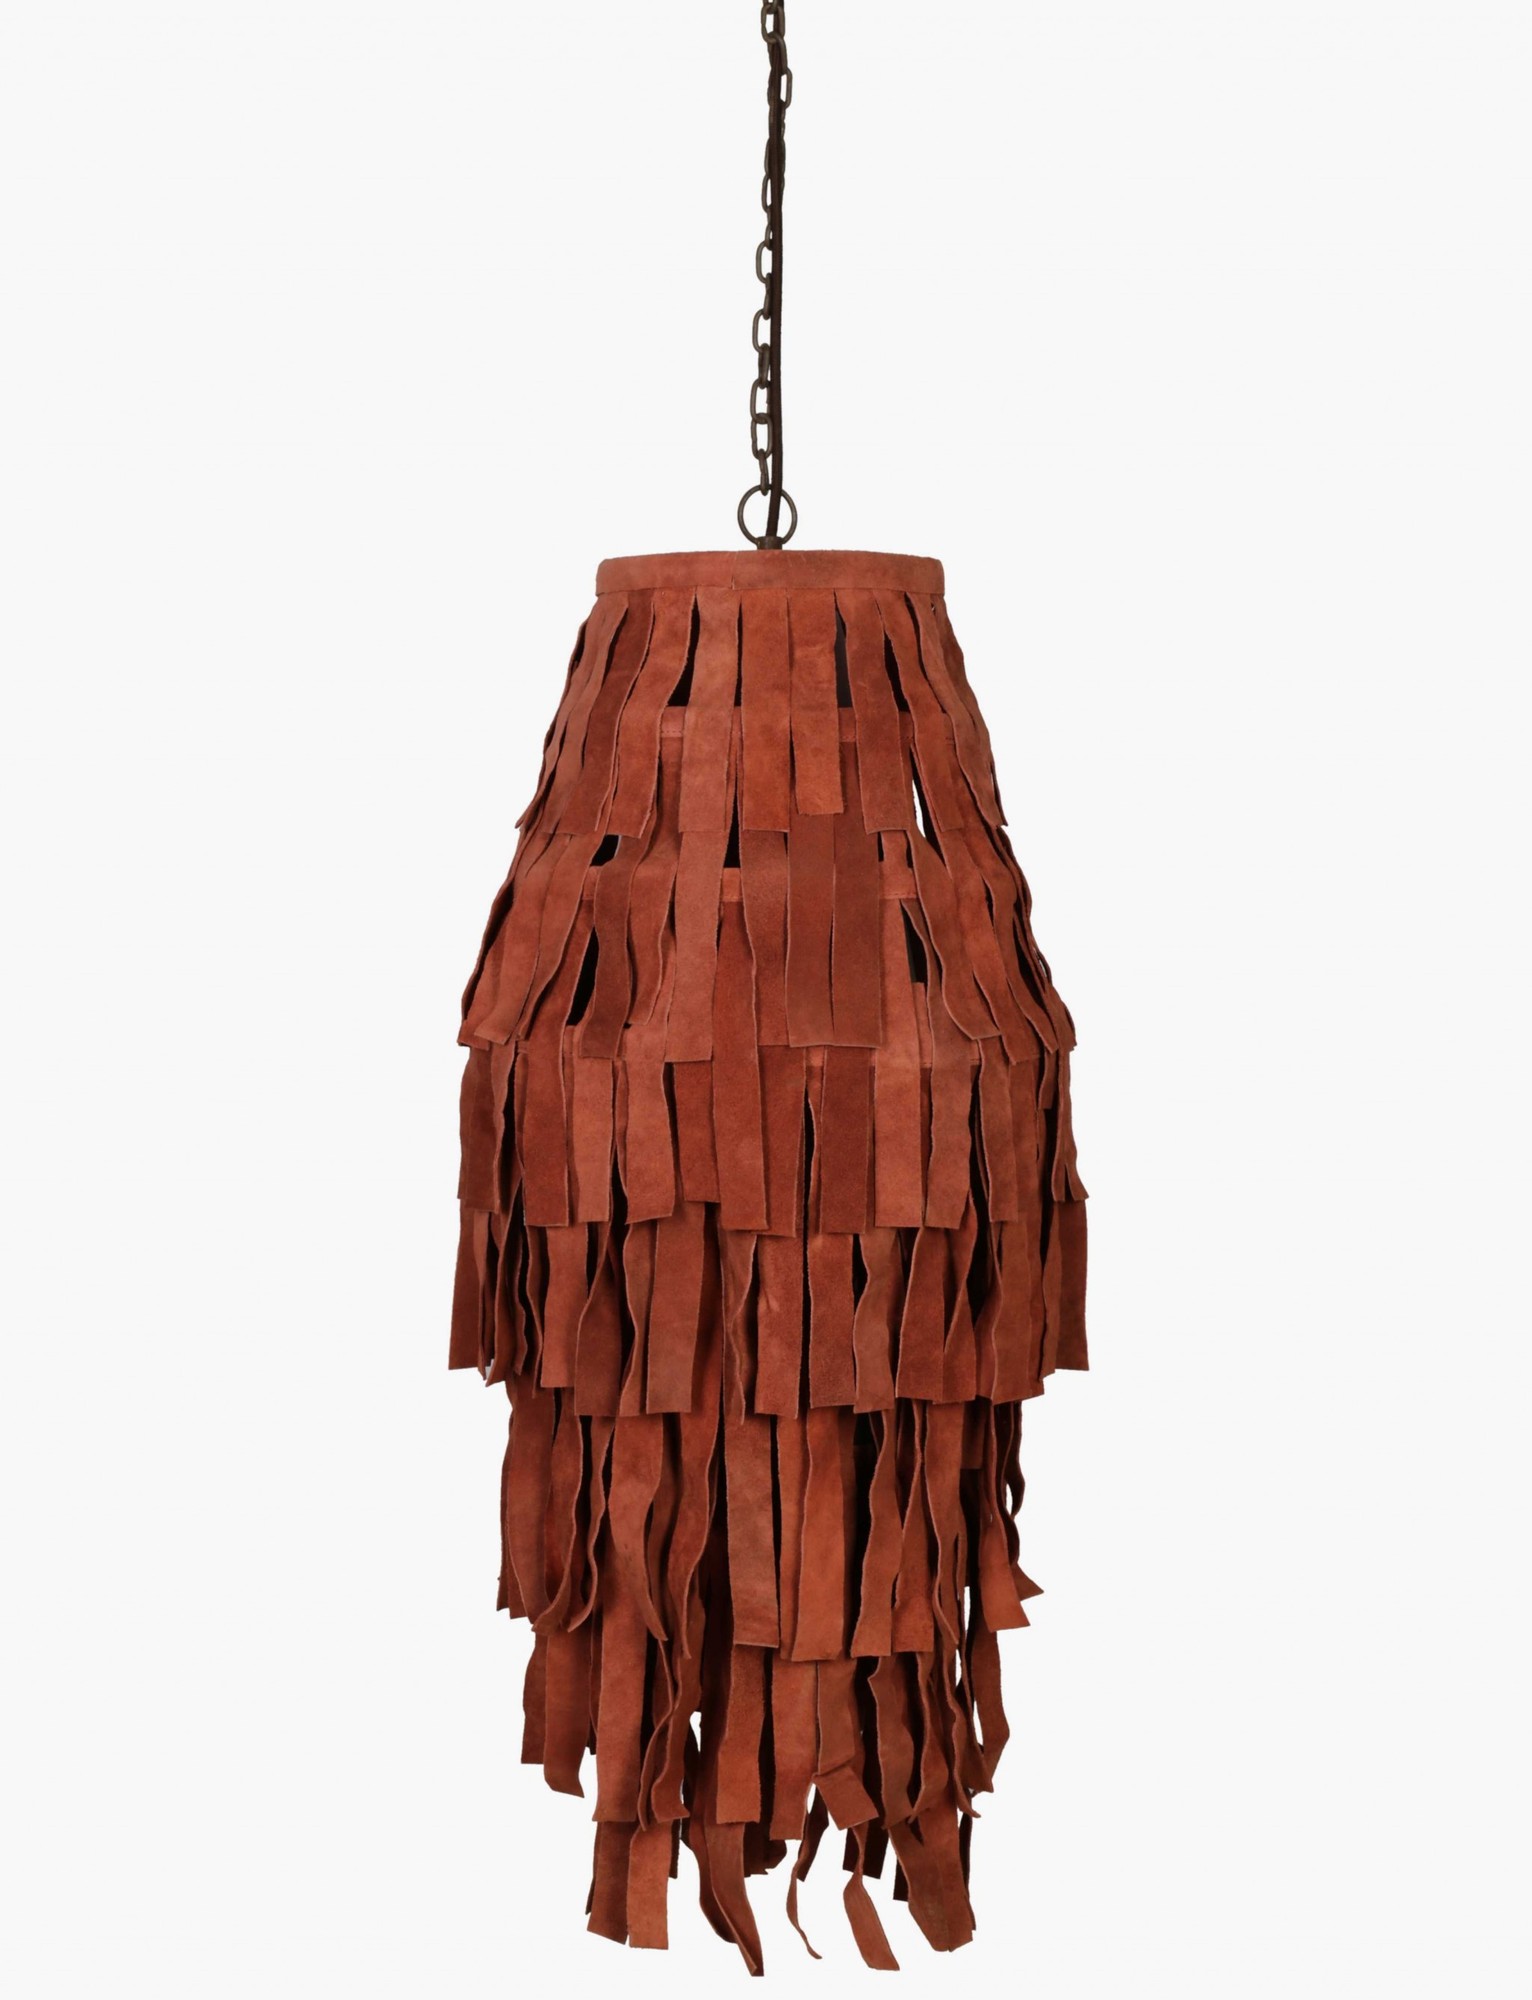 14" X 14" X 34" Red Iron Leather Pendant Lamp